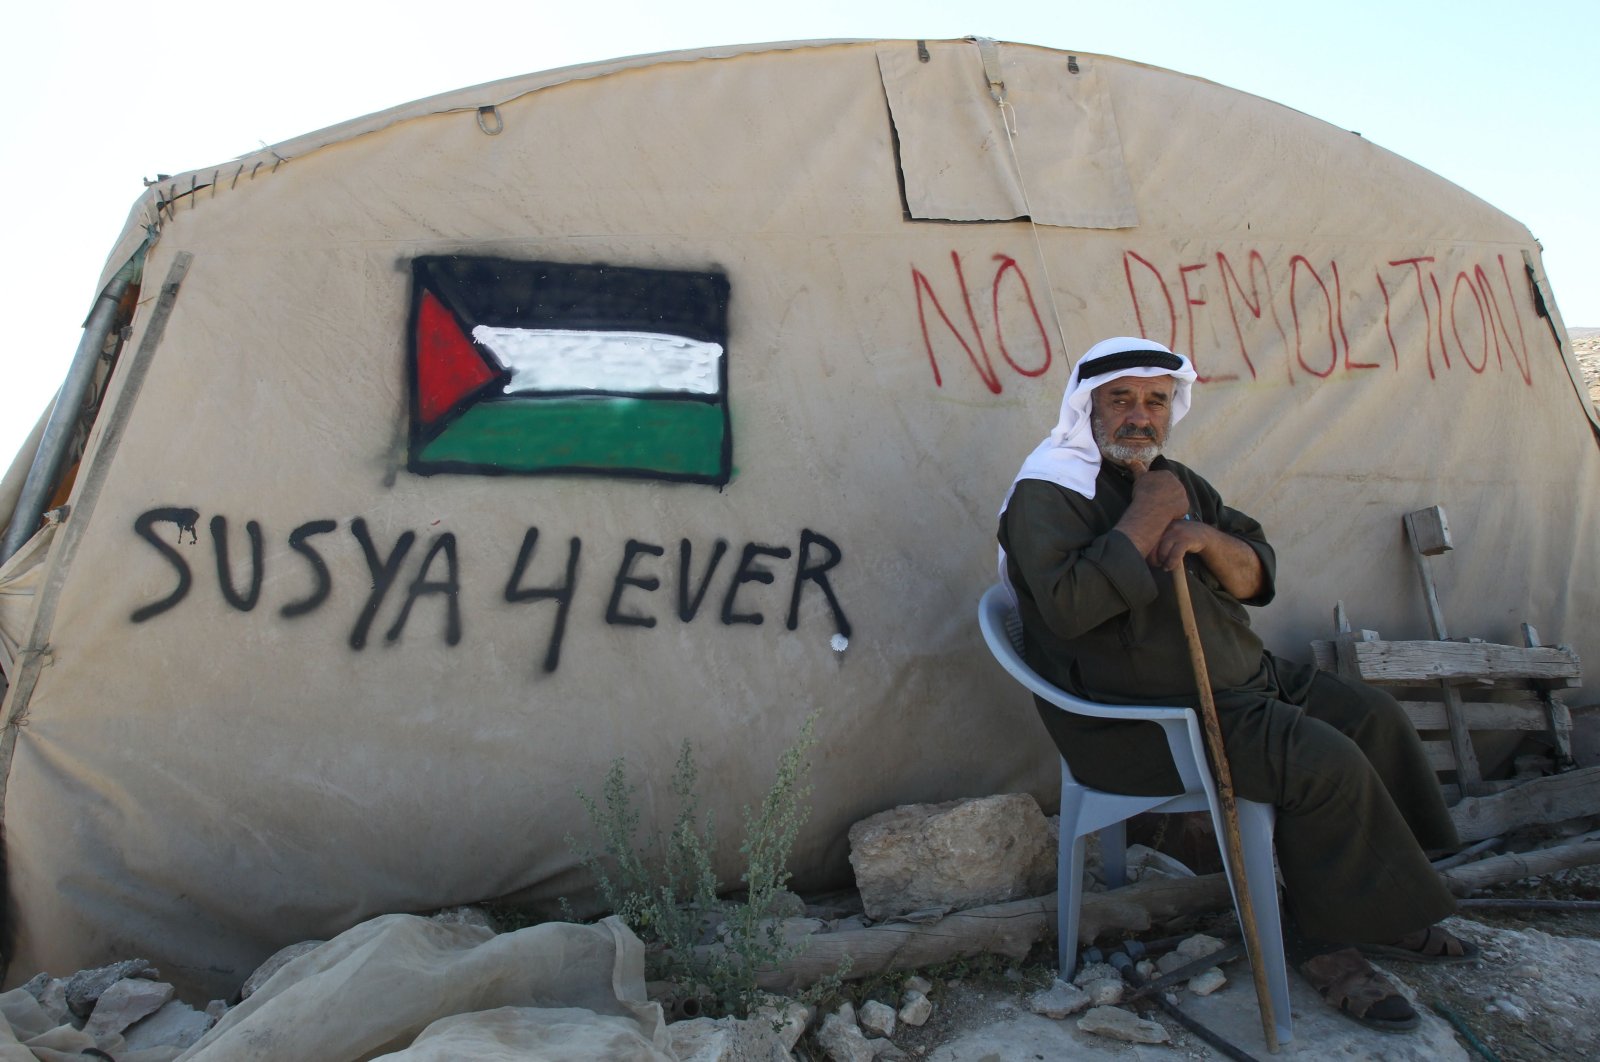 A Palestinian man sits outside his tent in the southern West Bank village of Susya, July 22, 2015. (AFP Photo)